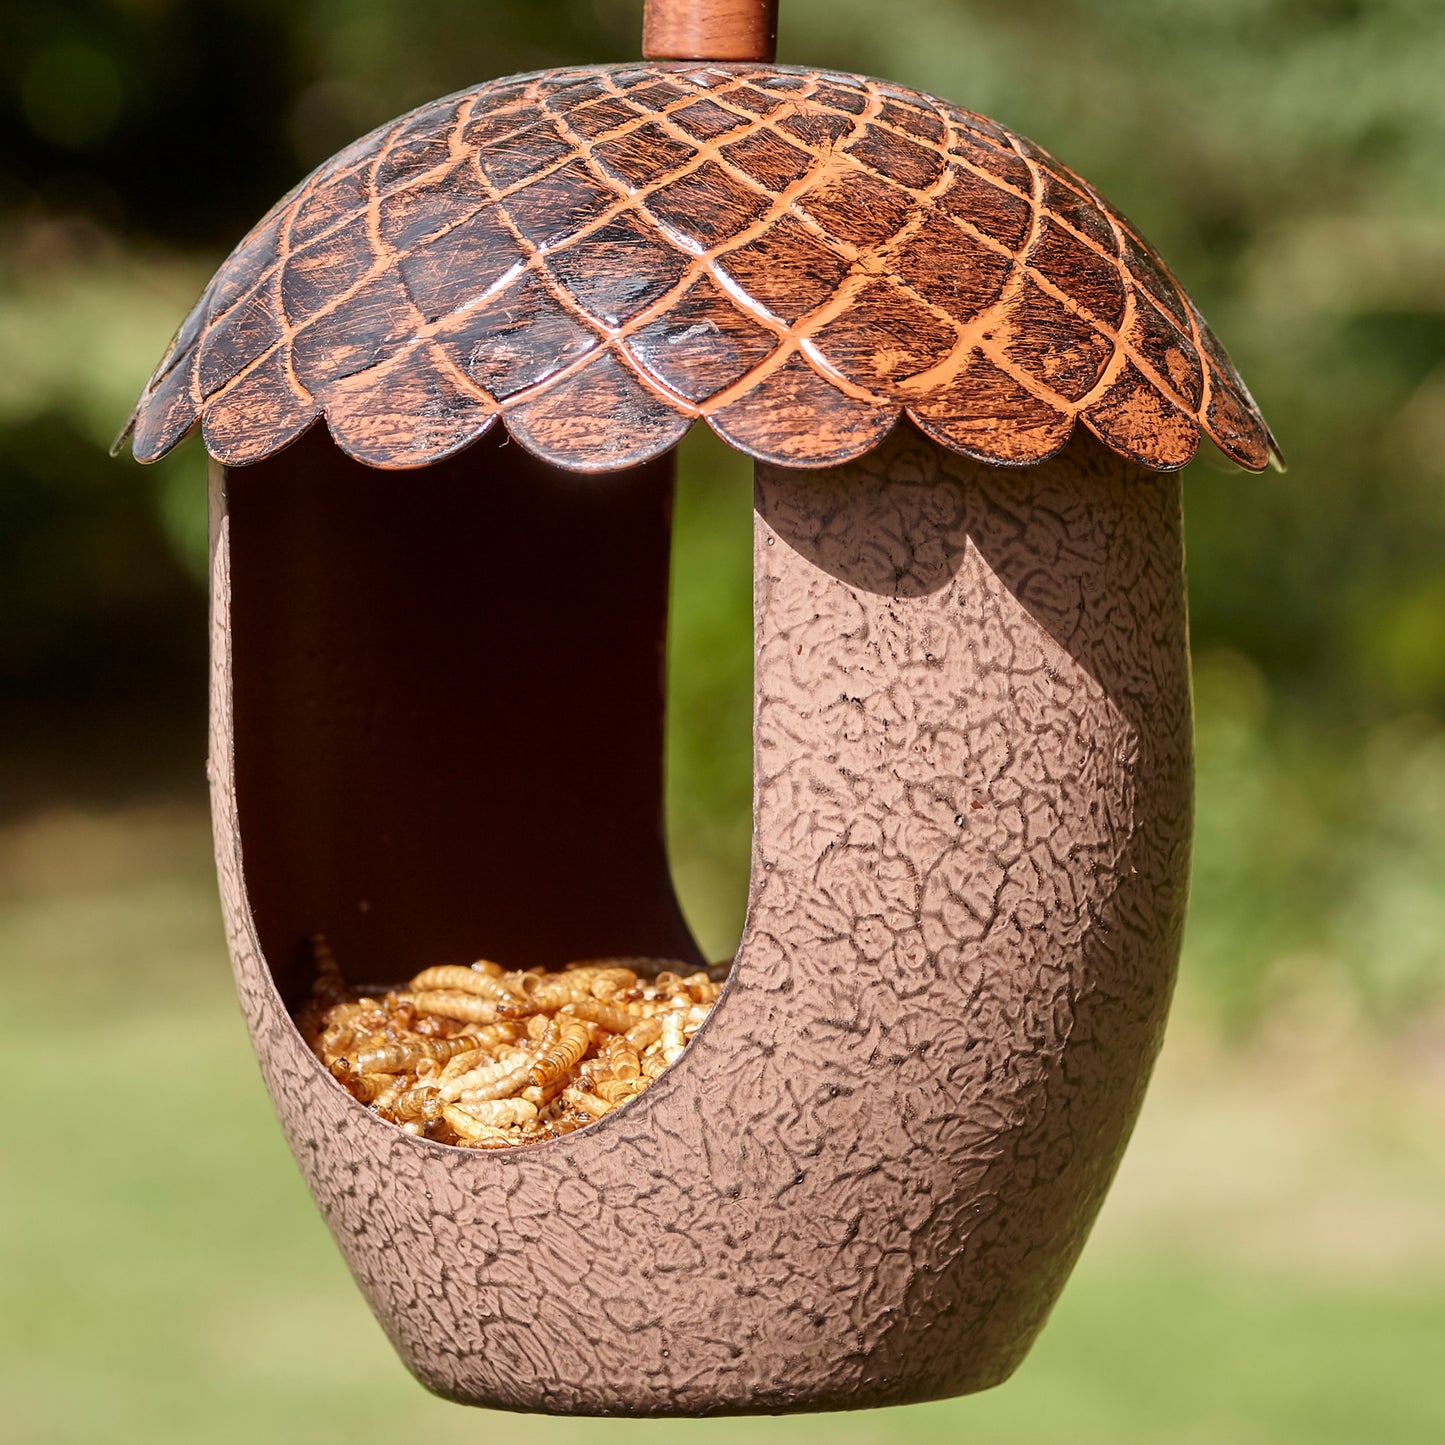 Peckish Acorn Feeder with mealworms